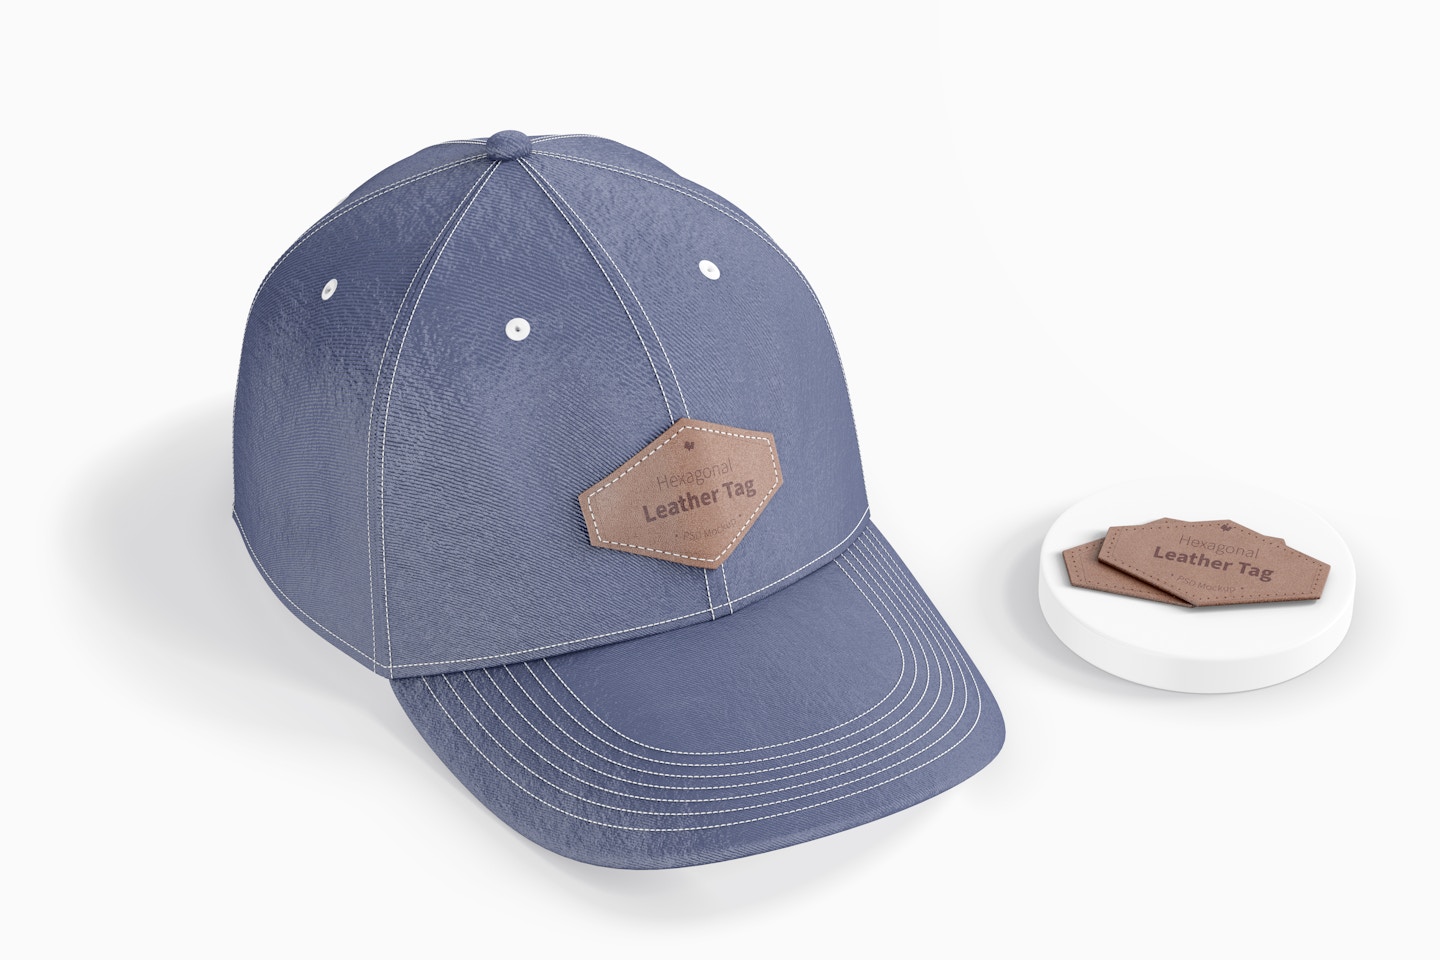 Hexagonal Leather Tags on Cap Mockup